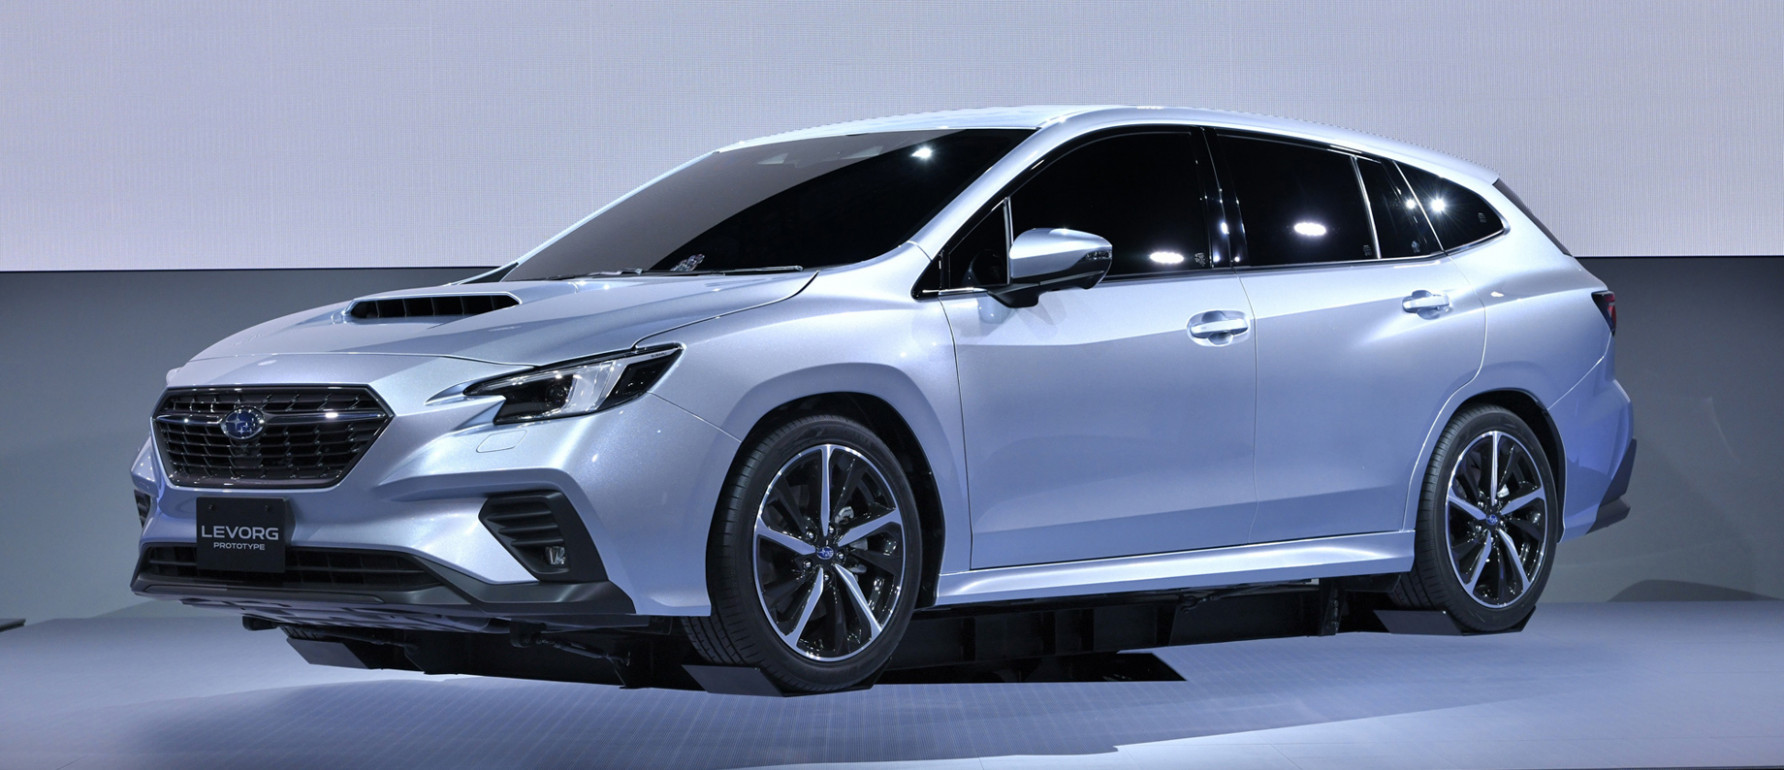 Redesign and Concept 2022 Subaru Legacy